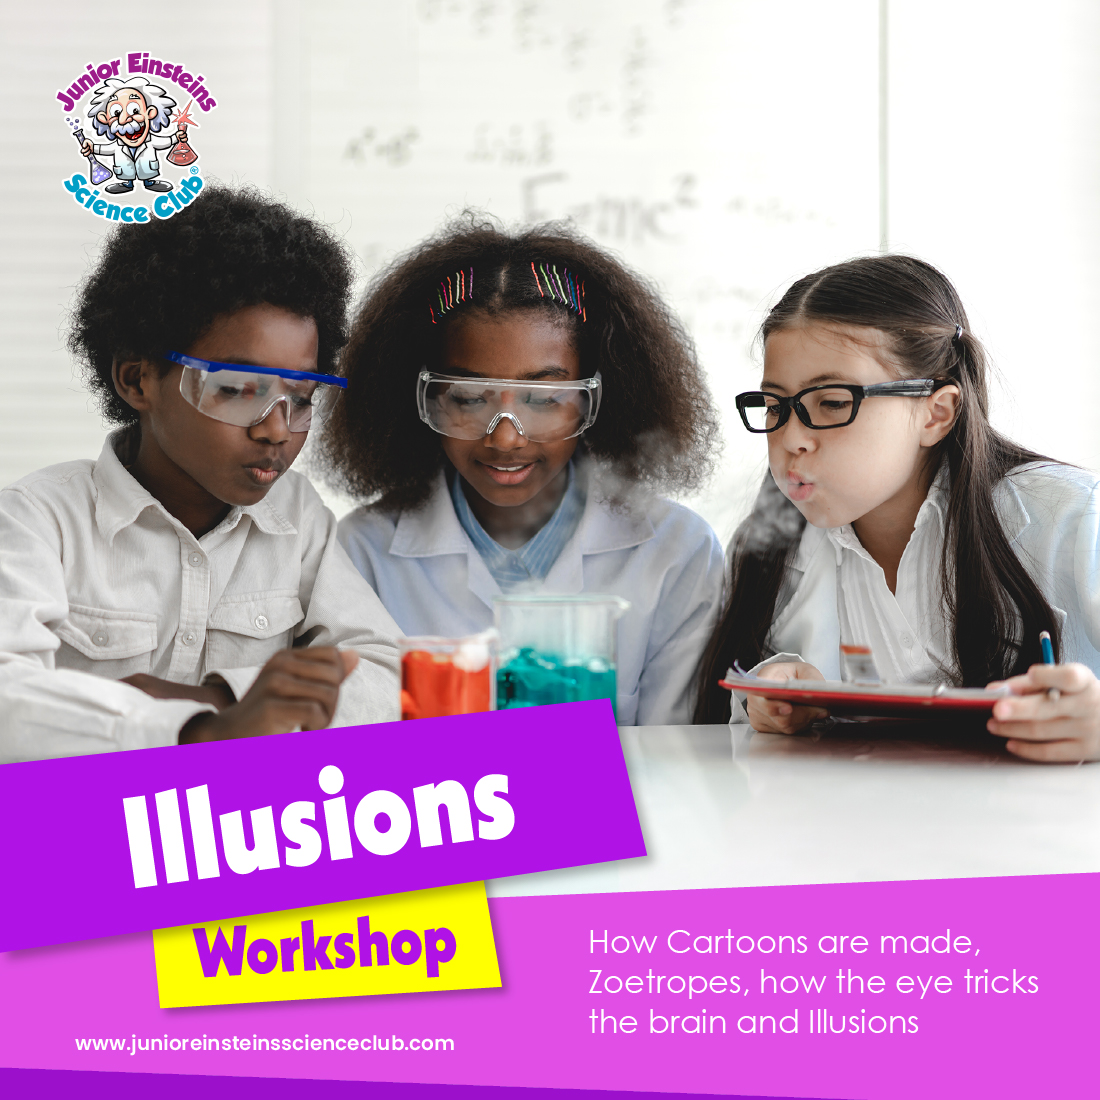 Illusions STEM Workshop. How Cartoons are made, illusions and How the eye tricks the brain! A treat for #scienceweek #schooltour #halloween or just for fun! #junioreinsteins #kids #schools #teachers #STEM #science #edchat #edchatie #Dublin